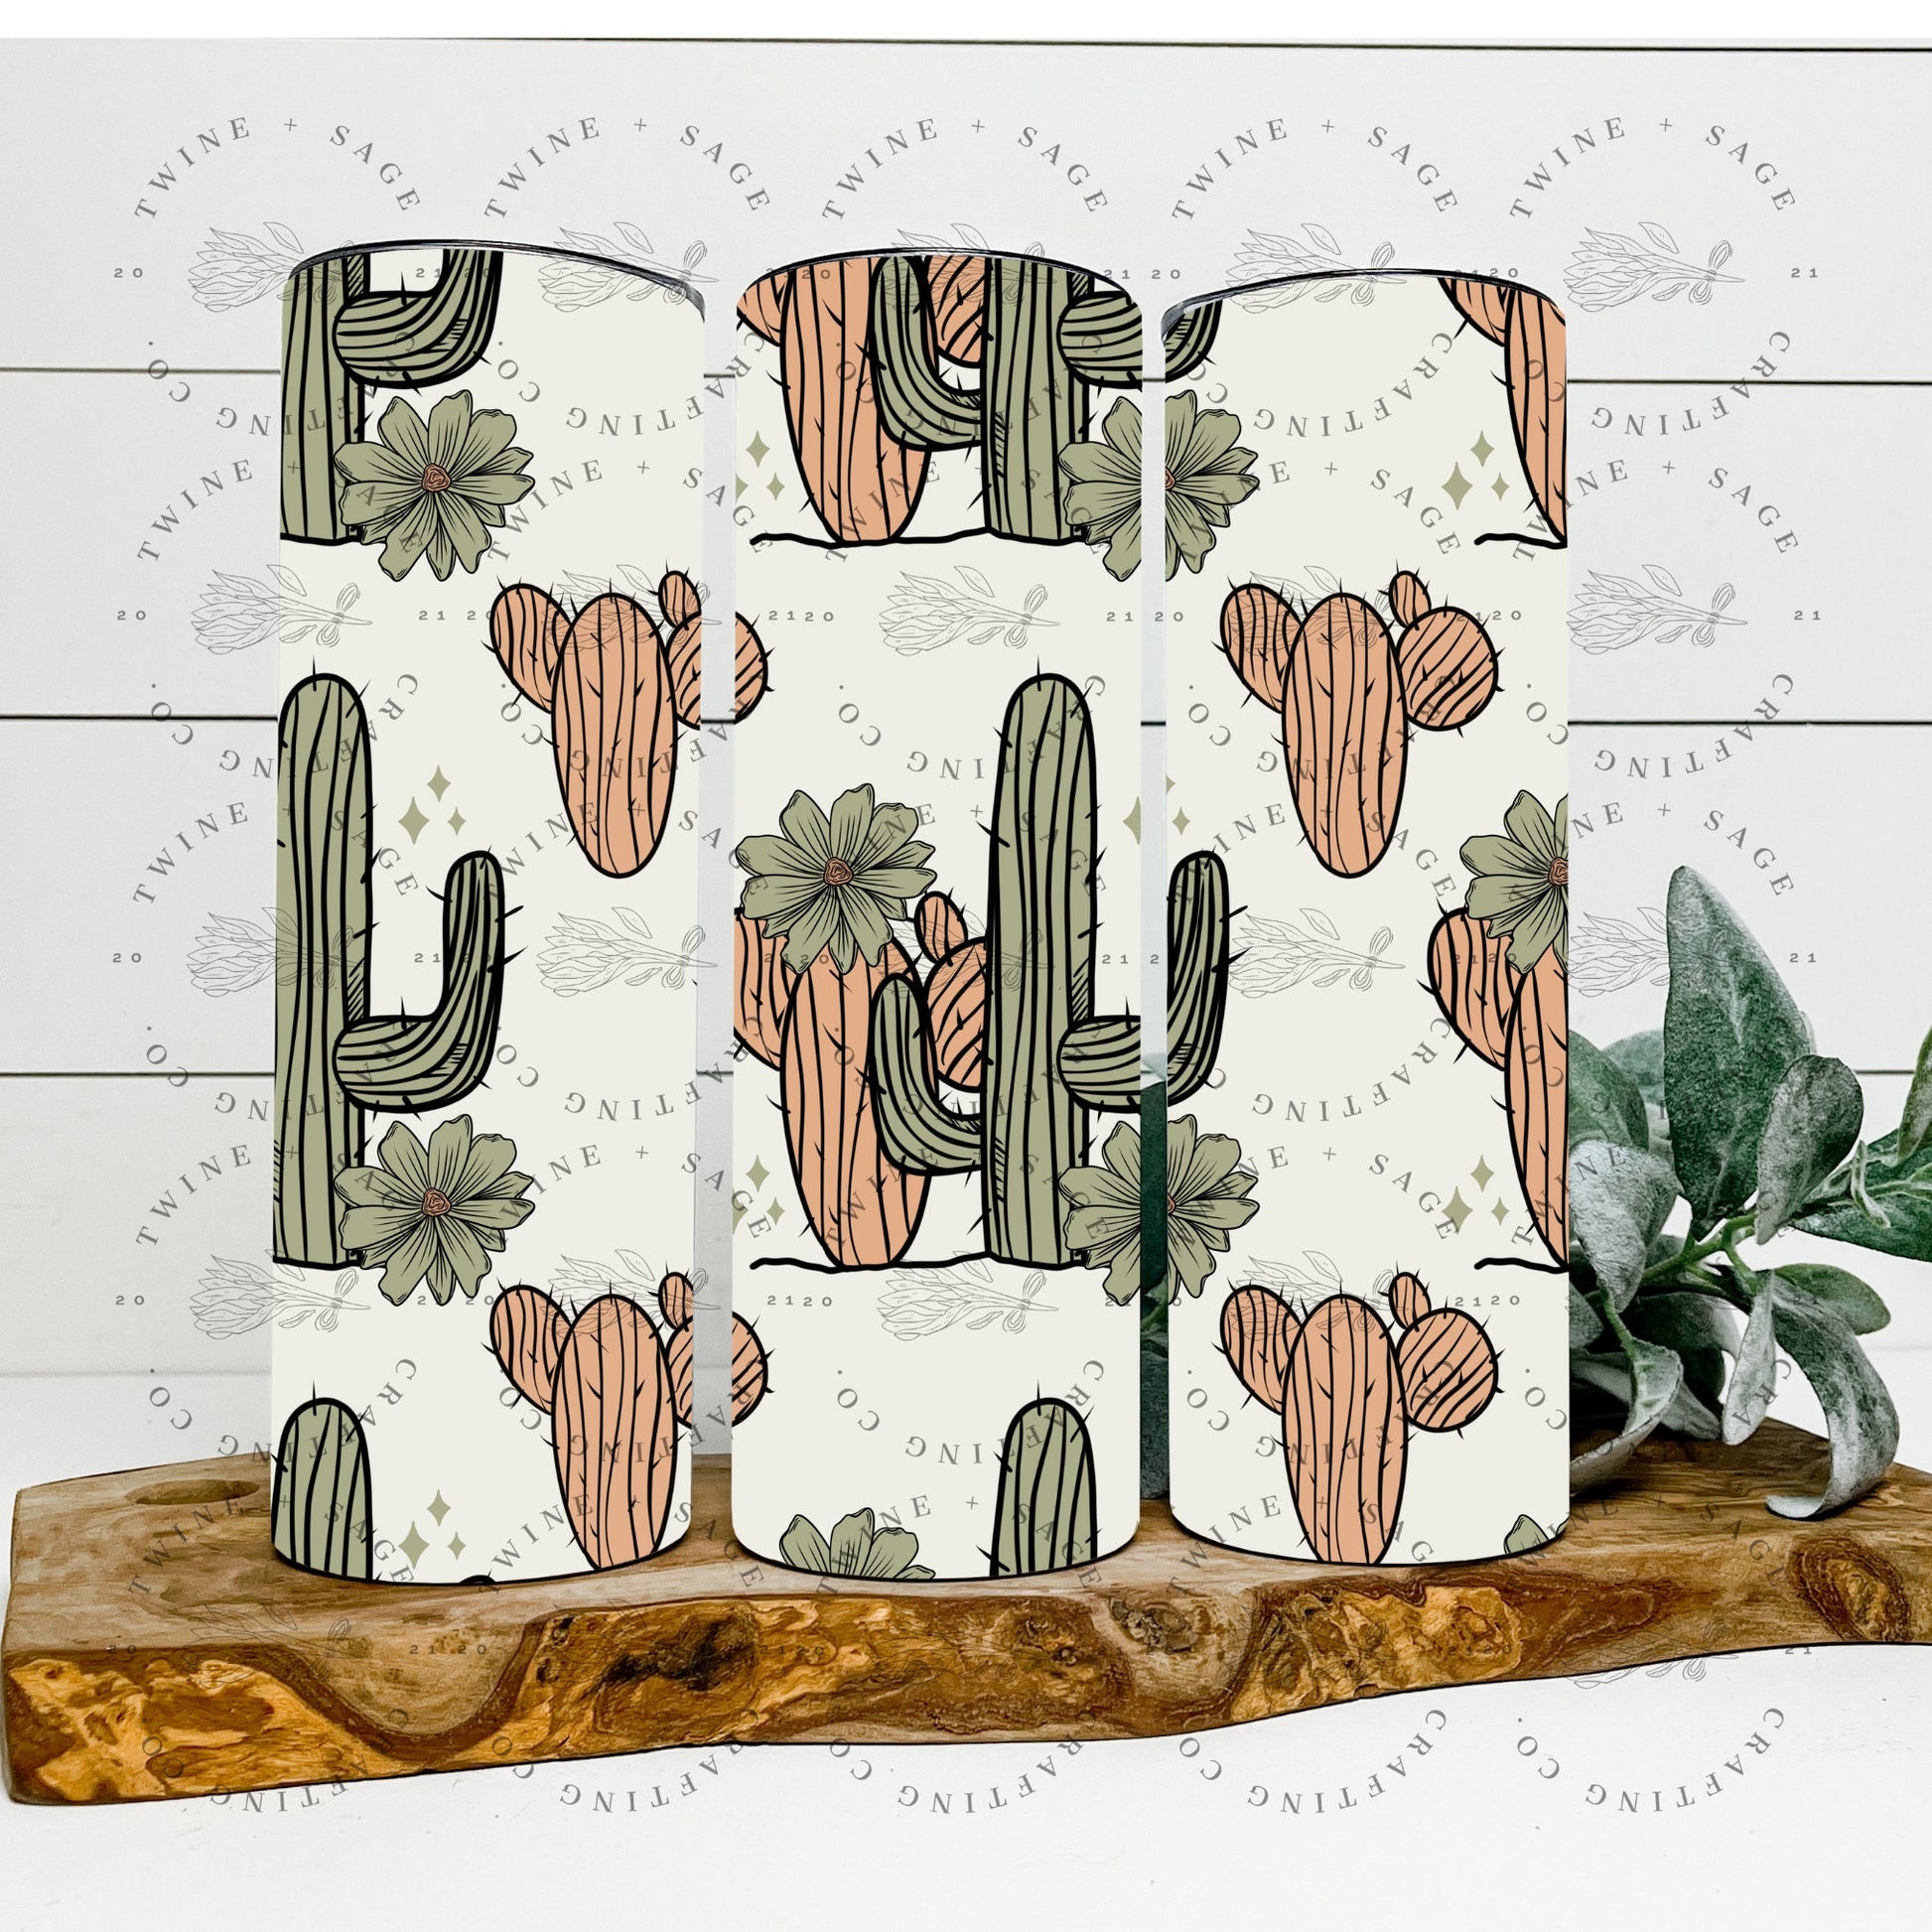 Cactus Tumbler, Skinny Tumbler, Mama Tumbler, Desert Cactus Cup, Gift, Mother's Day Gift, Gift For Her